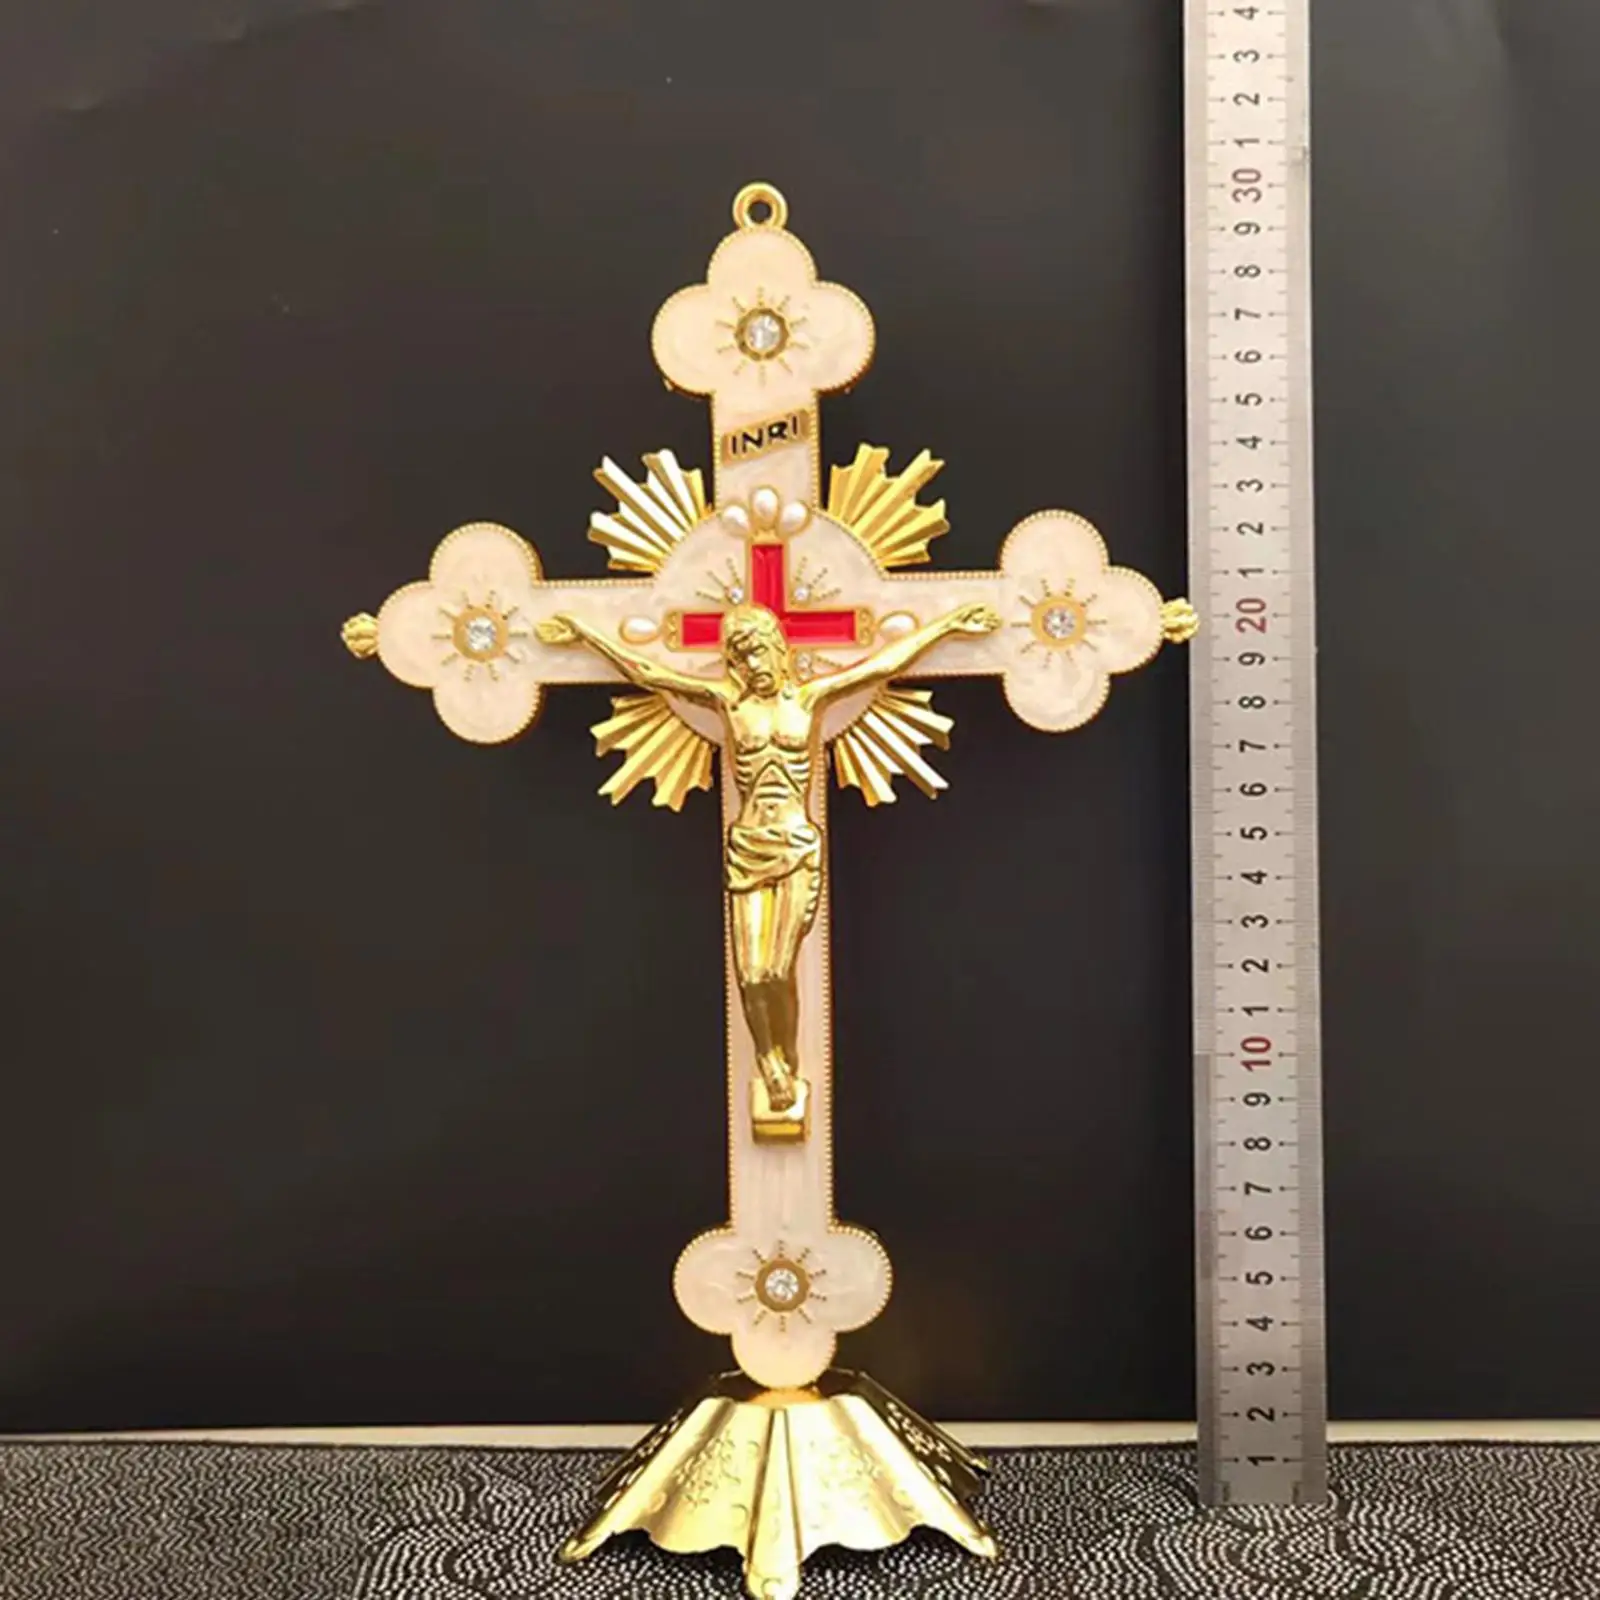 Standing Crucifix Collection Sculpture Catholic Jesus Cross Statue, Jesus Crucifix for Home Altar Tabletop Prayers Living Room